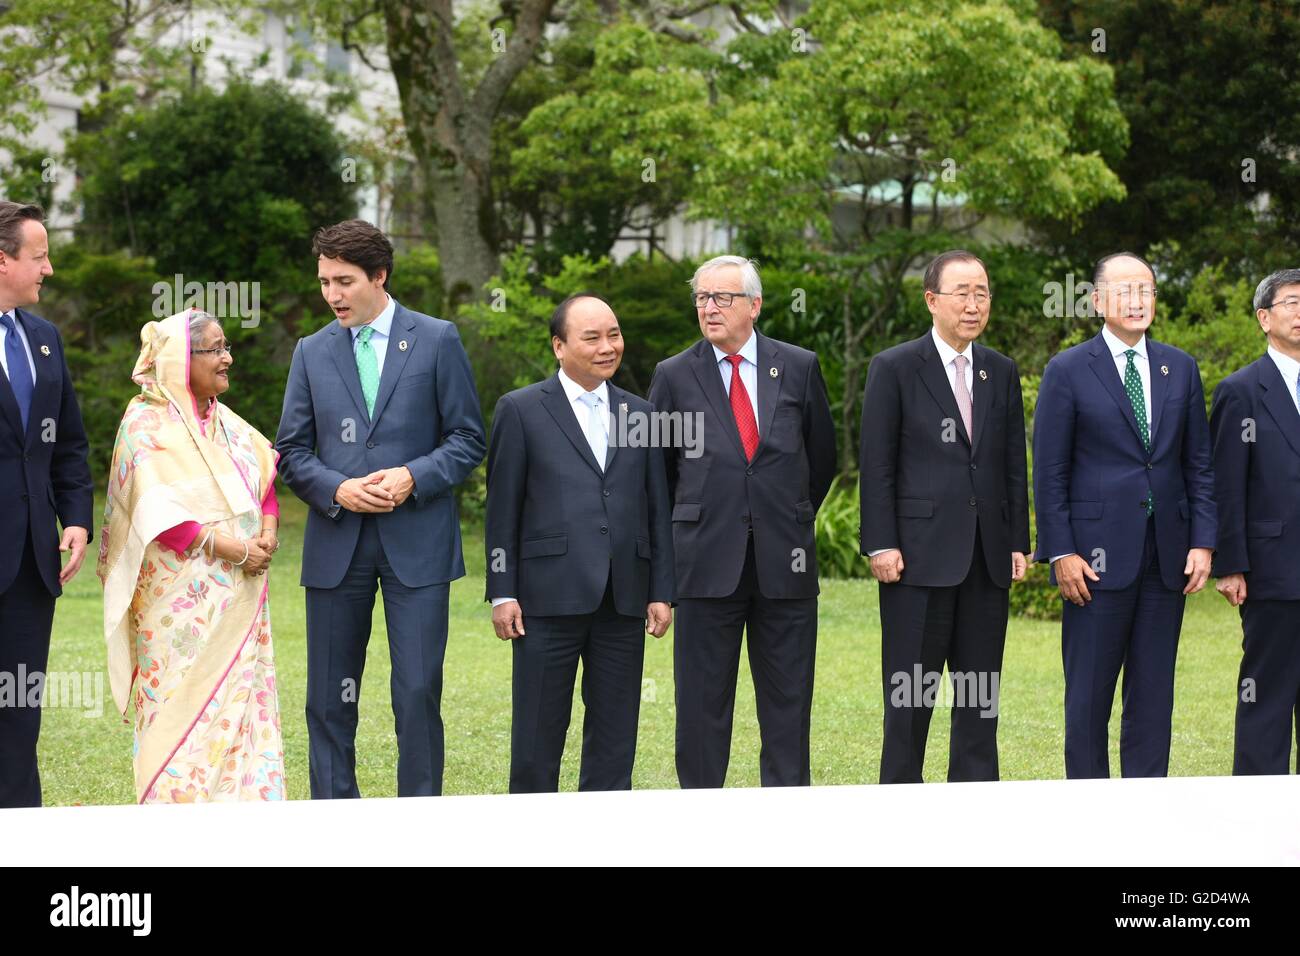 Shima, Japan. 27th May, 2016. World leaders during a expanded group photo at the G7 Summit meeting at the Shima Kano Hotel grounds May 27, 2016 in Shima, Japan. Left to Right: British Prime Minister David Cameron, Bangladesh Prime Minister Sheikh Hasina Wazed, Canadian Prime Minister Justin Trudeau, Vietnam President Truong Tan Sang, European Union President Jean-Claude Juncker, United Nations General Secretary Ban Ki Moon and World Bank President Jim Yong Kim. Credit:  Planetpix/Alamy Live News Stock Photo